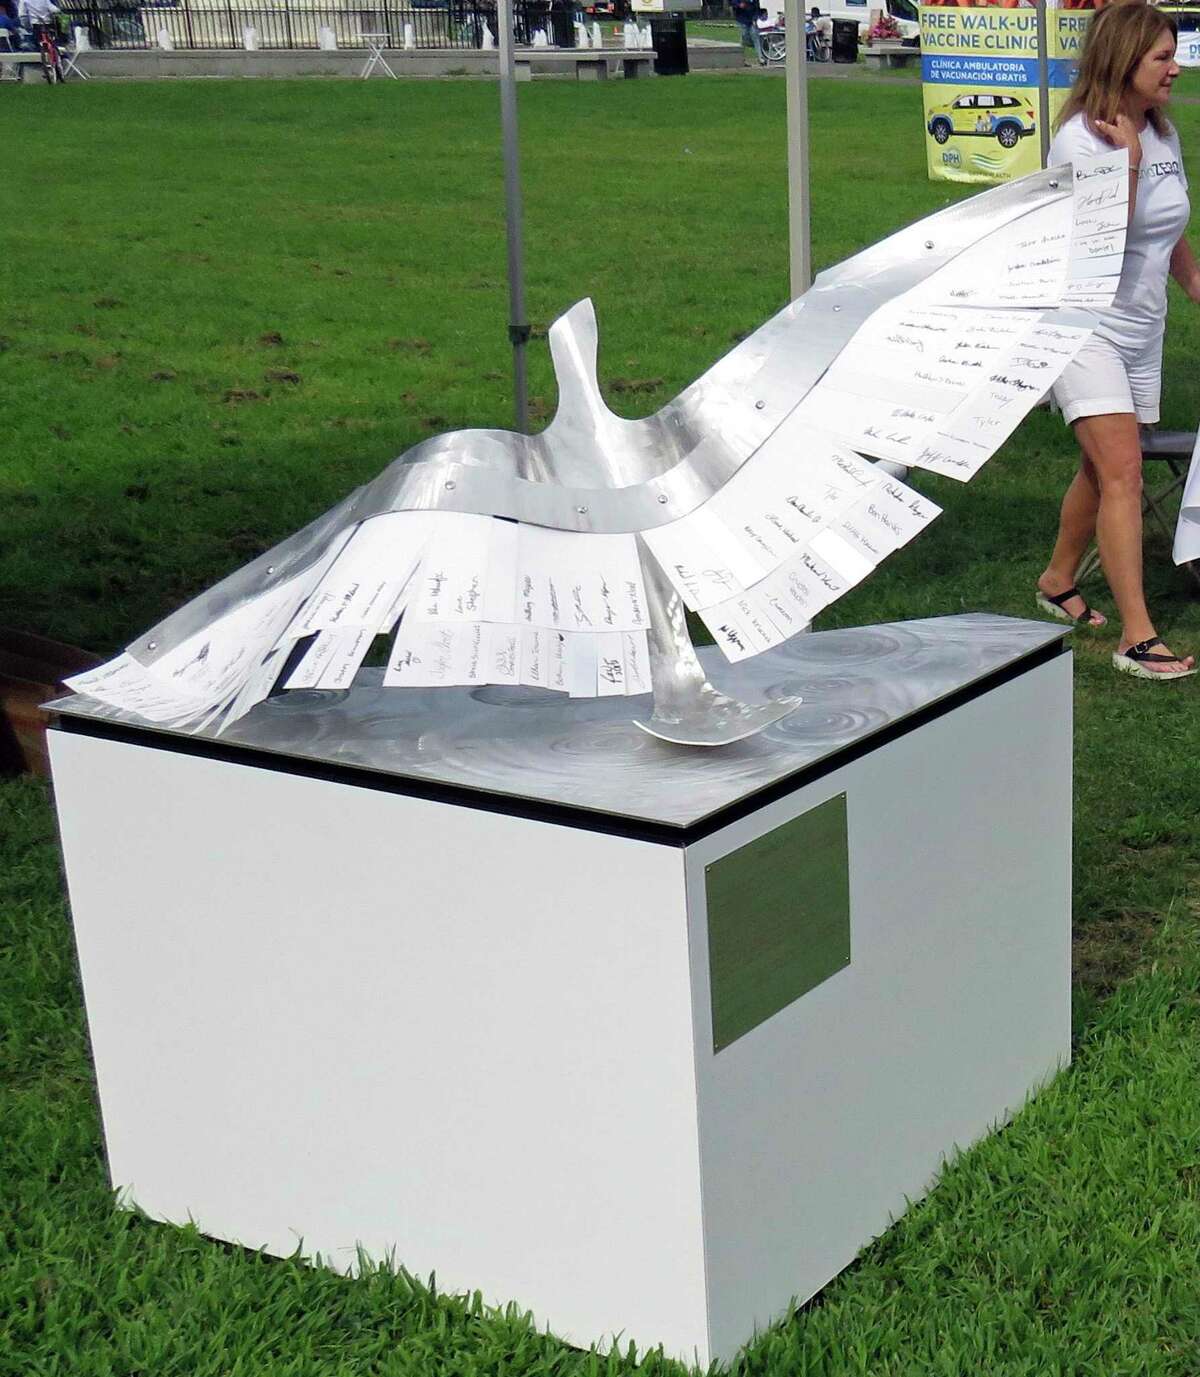 Signature Sculpture at International Overdose Awareness Day on the New Haven Green, with Demand ZERO’s Lisa Deane in upper right corner.